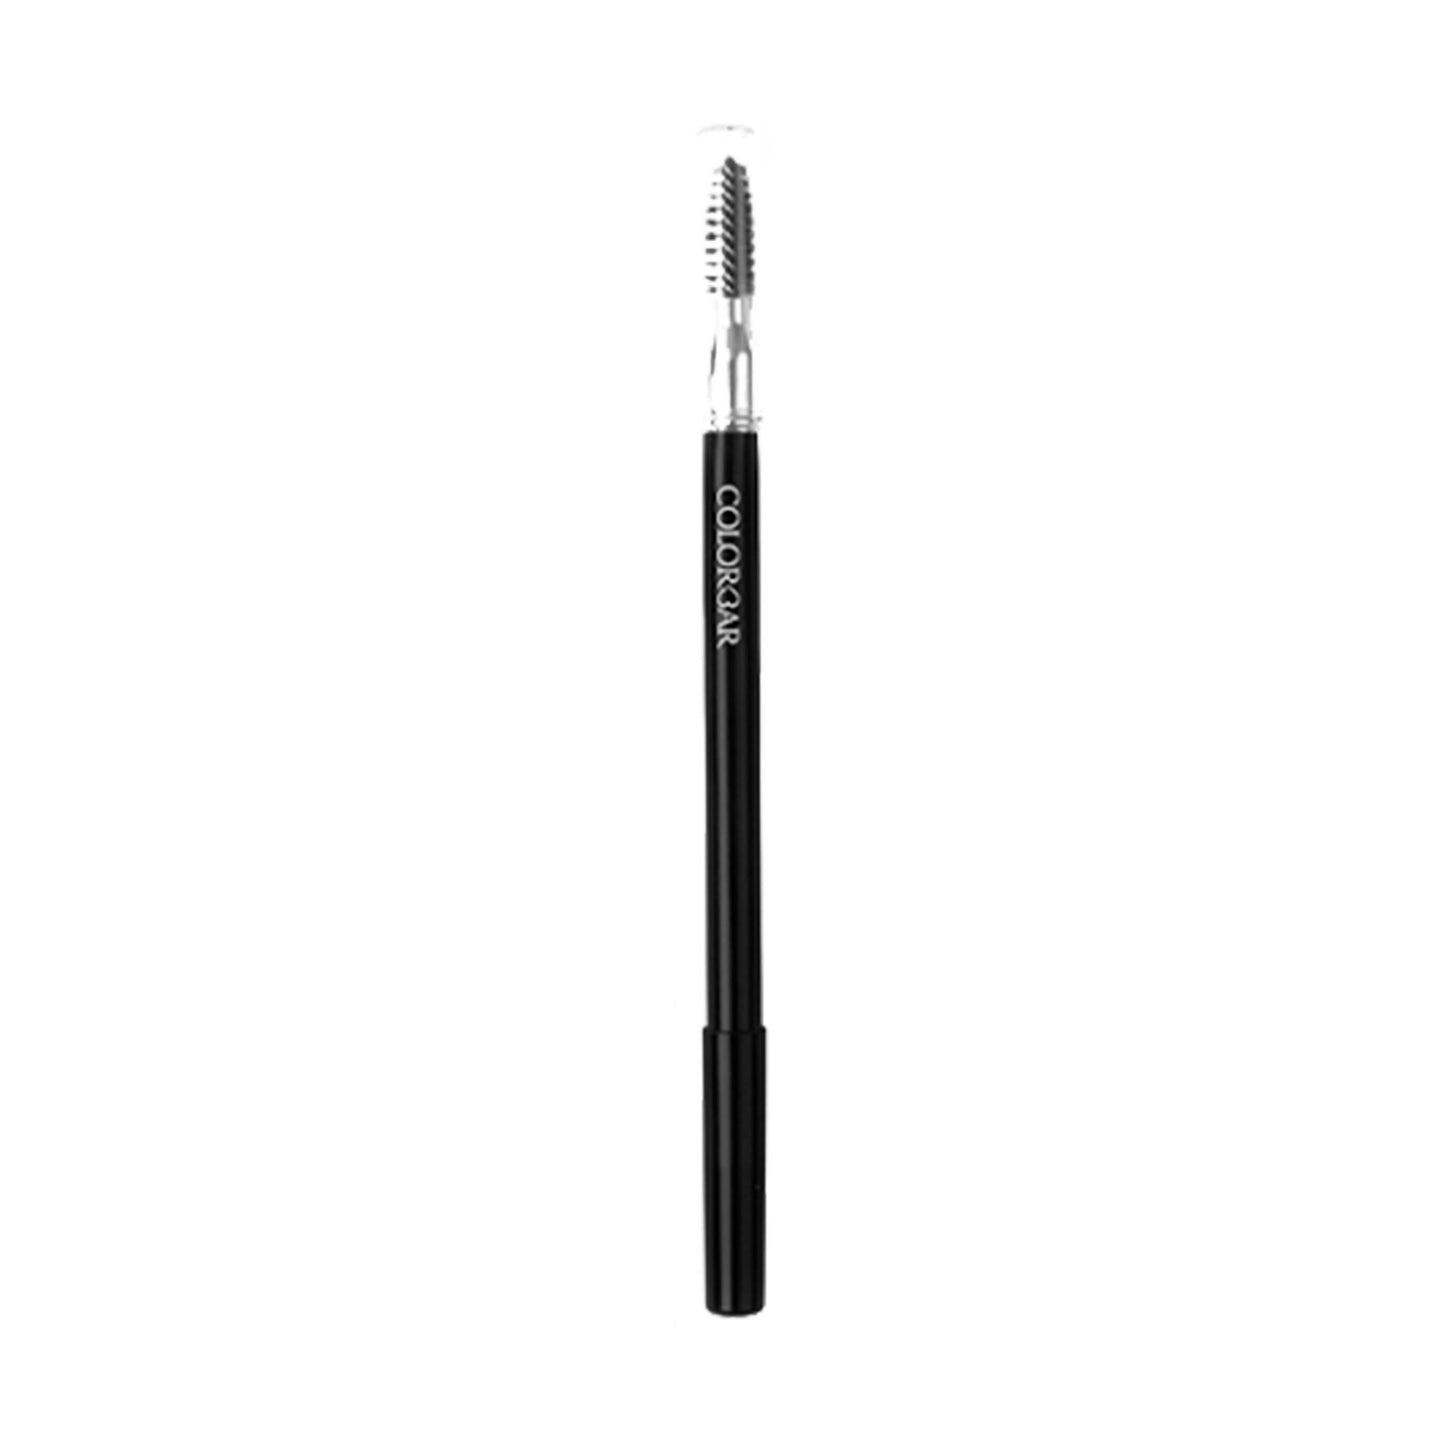 Colorbar Stunning Brow Pencil New Chestnut - [001] - buy in USA, Australia, Canada